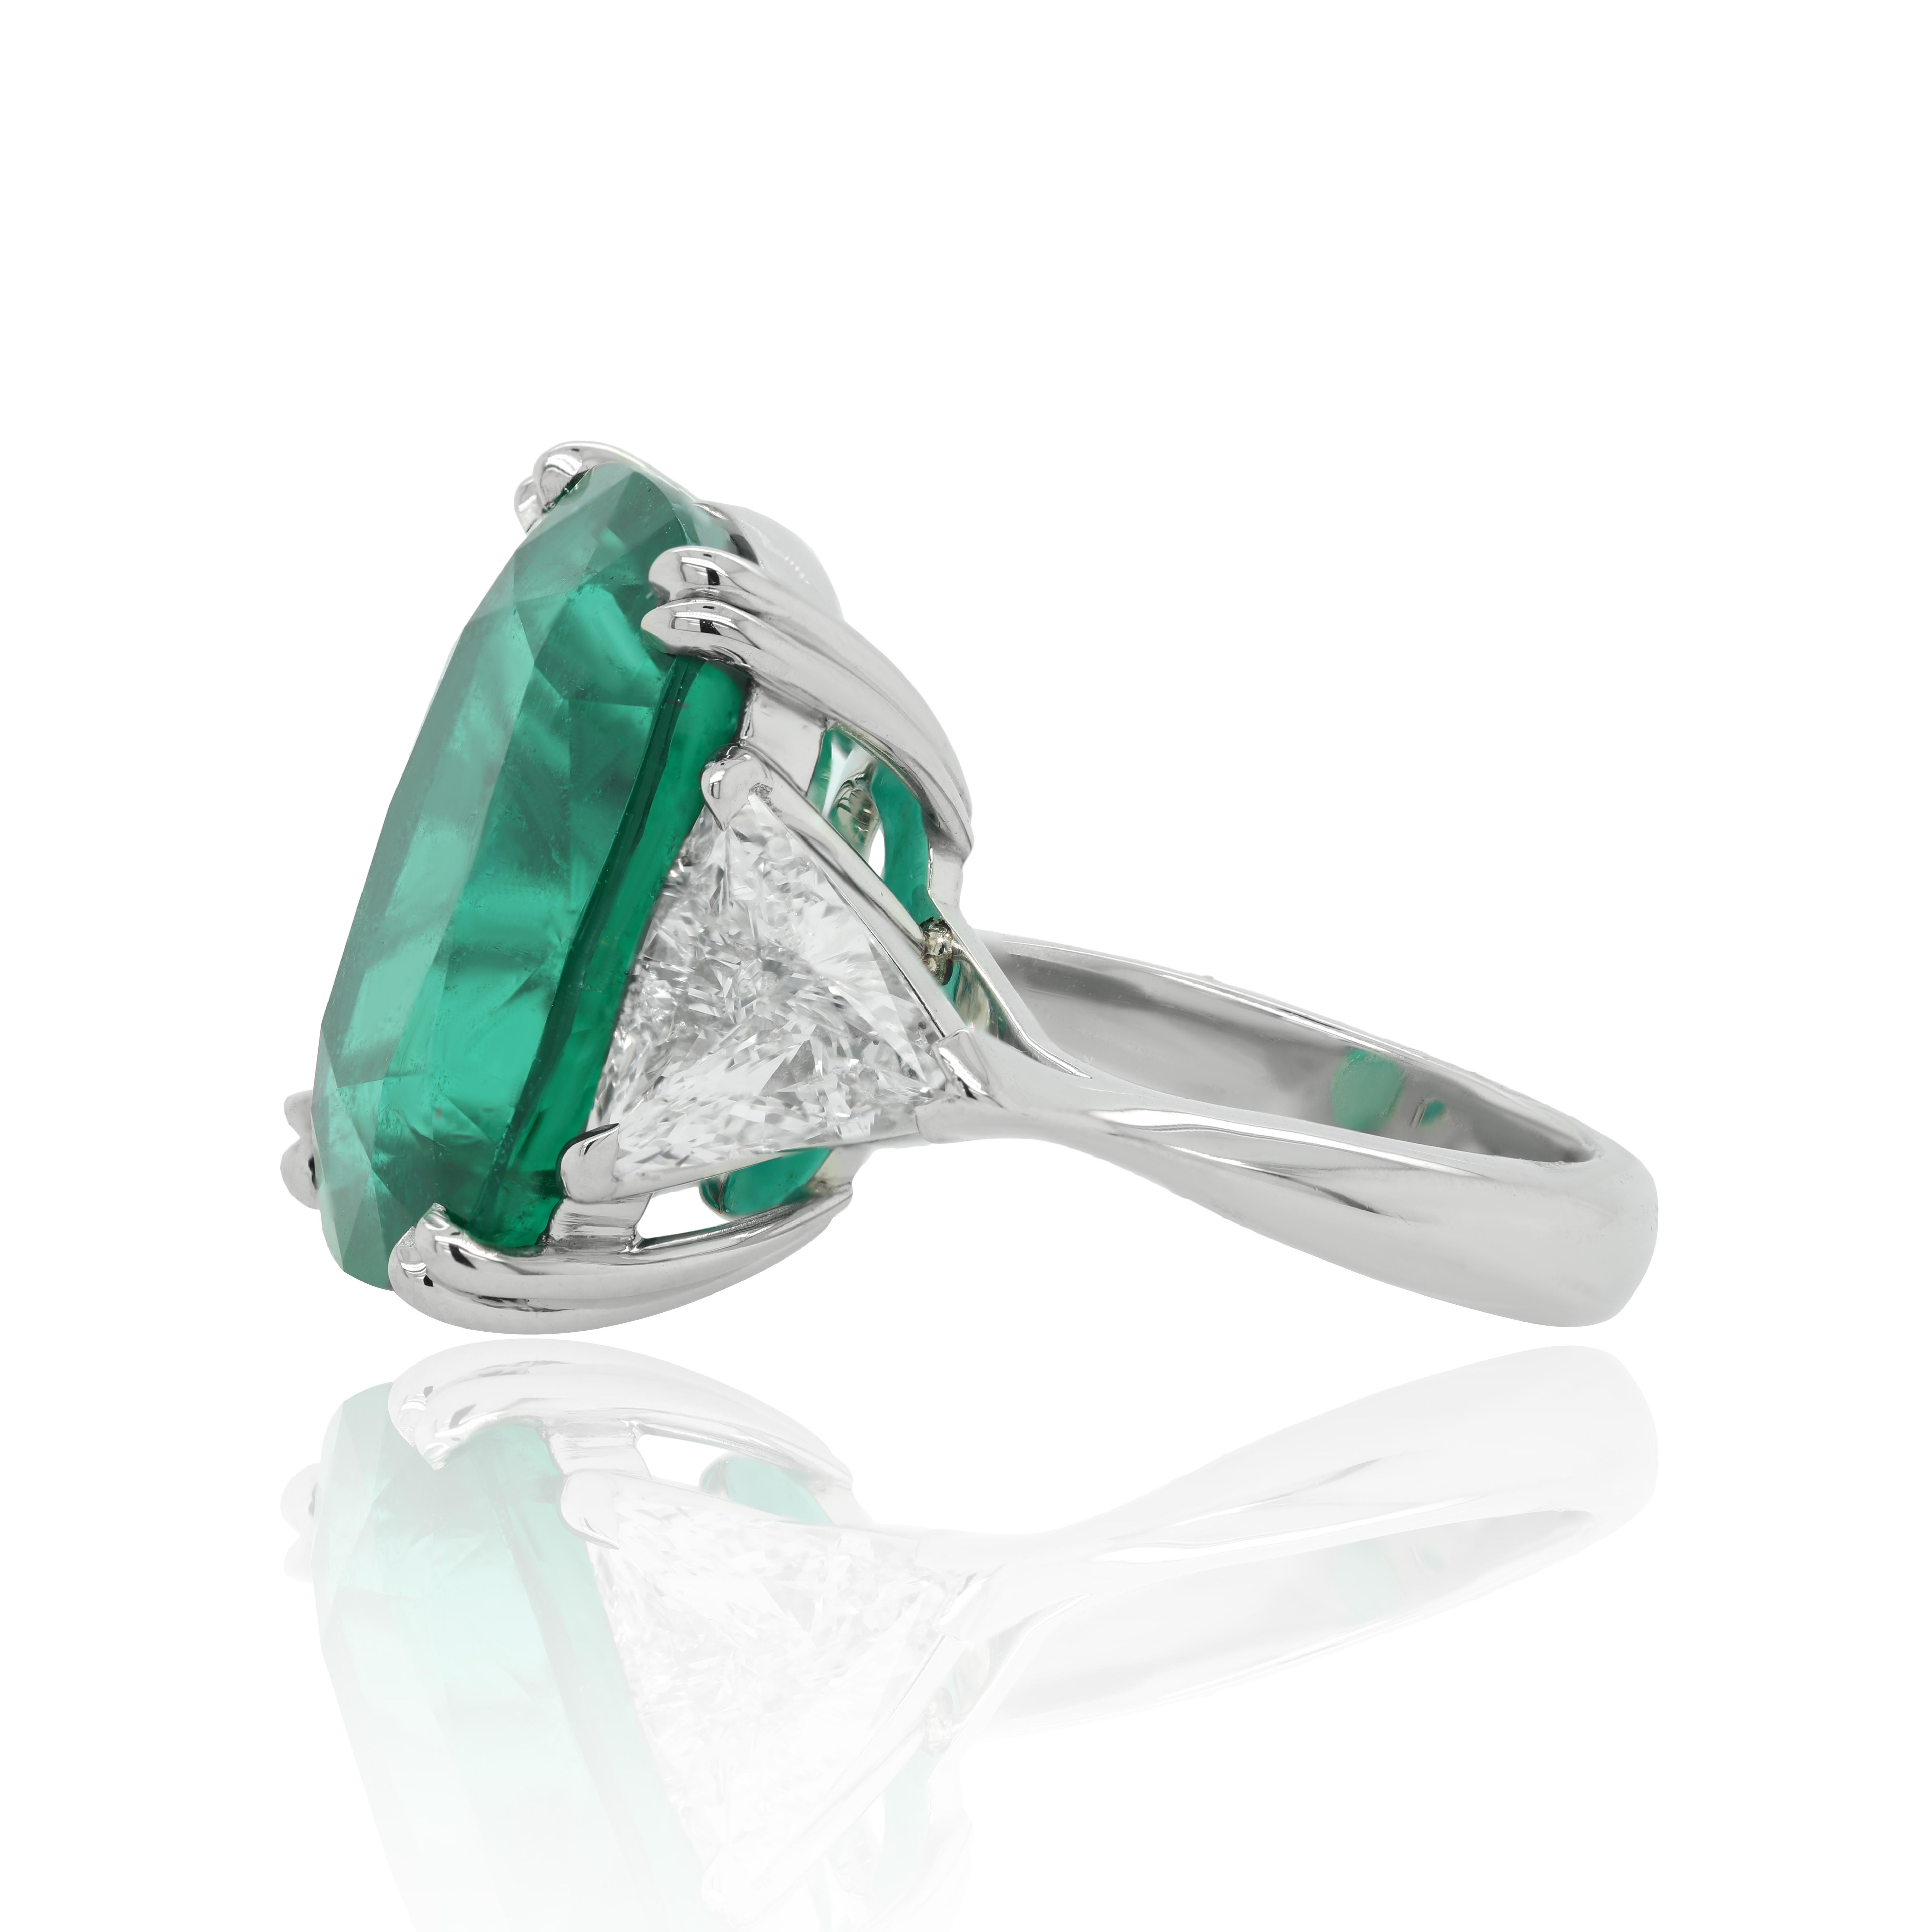 Platinum emerald ring features 15.85 carat of an emerald set in a setting with 2.18cts triangular modified certified gia 2 stone(1.06ct d si1 gia#2135020170 triangular modified and 1.12ct e si1 gia#2135042605 triangular modified)
